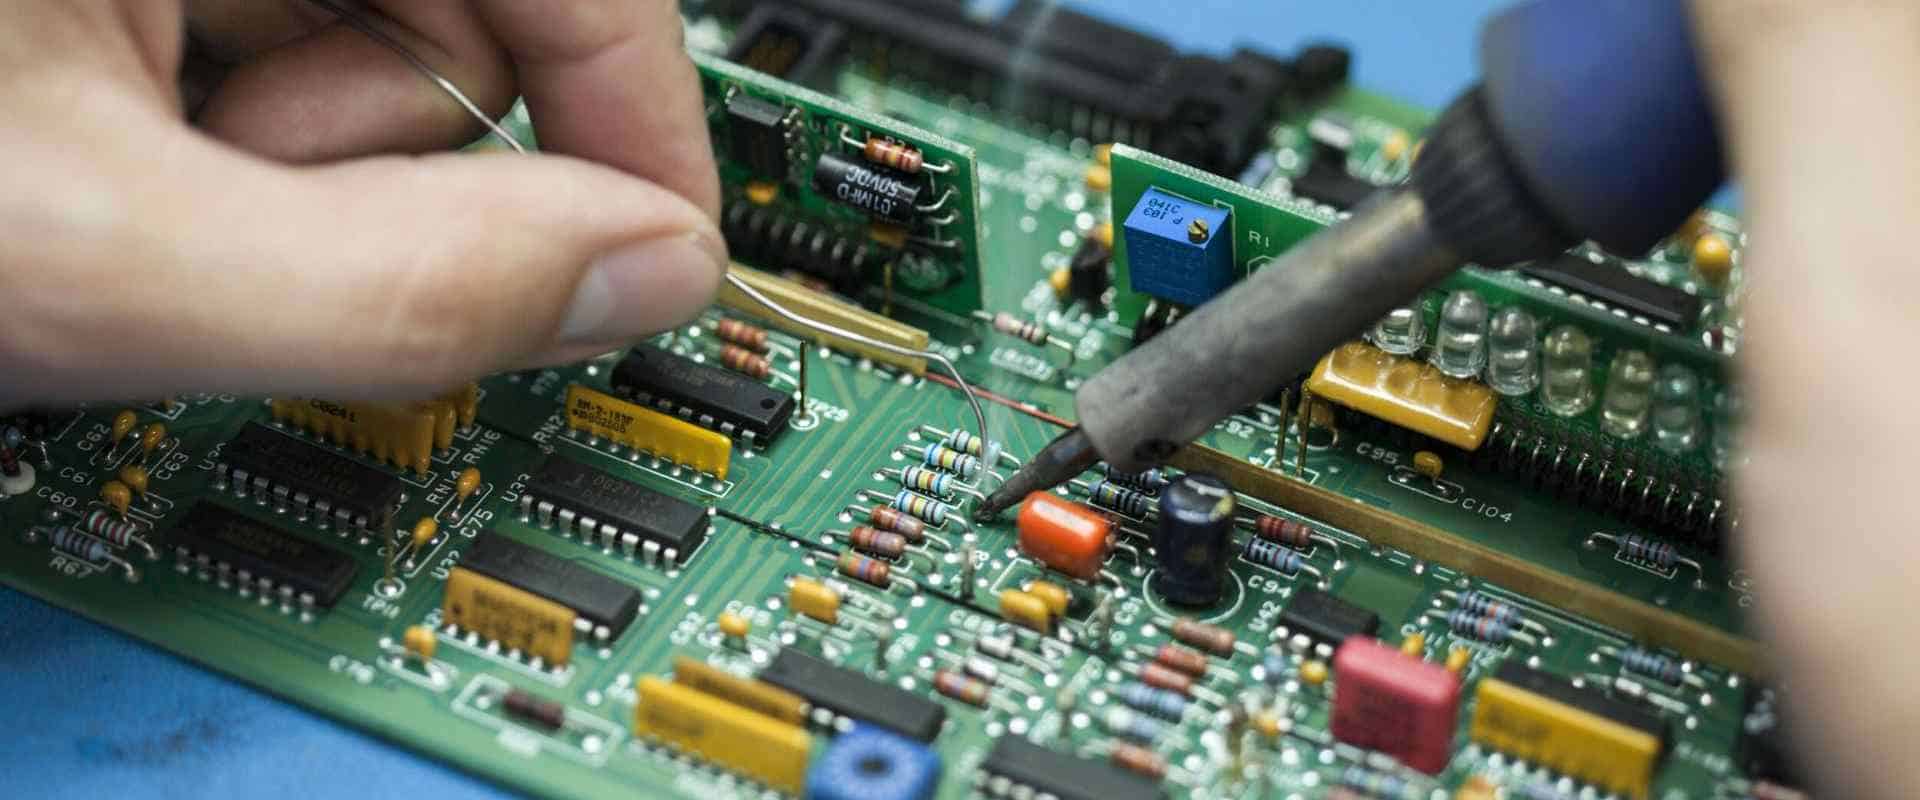 how-to-find-fault-in-pcb-board